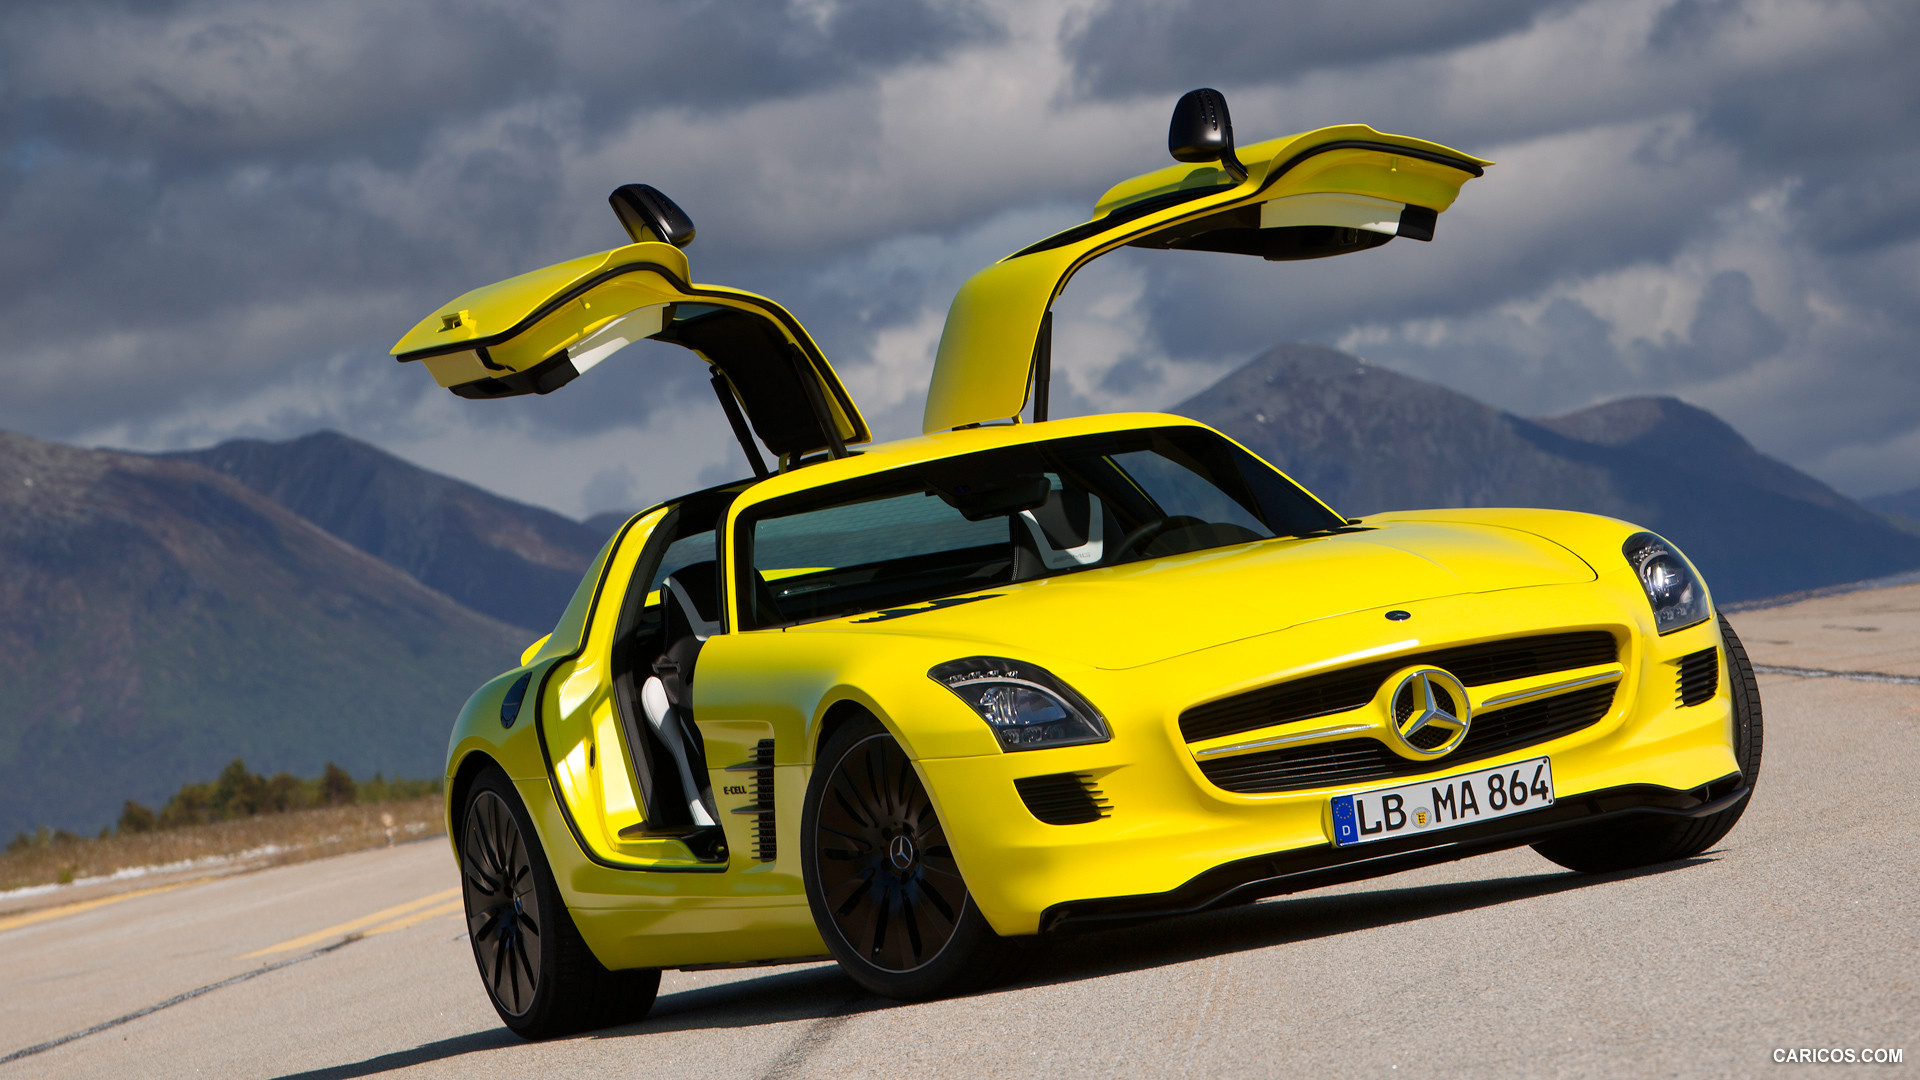 Mercedes-Benz SLS AMG E-CELL Concept  - Front, #13 of 60